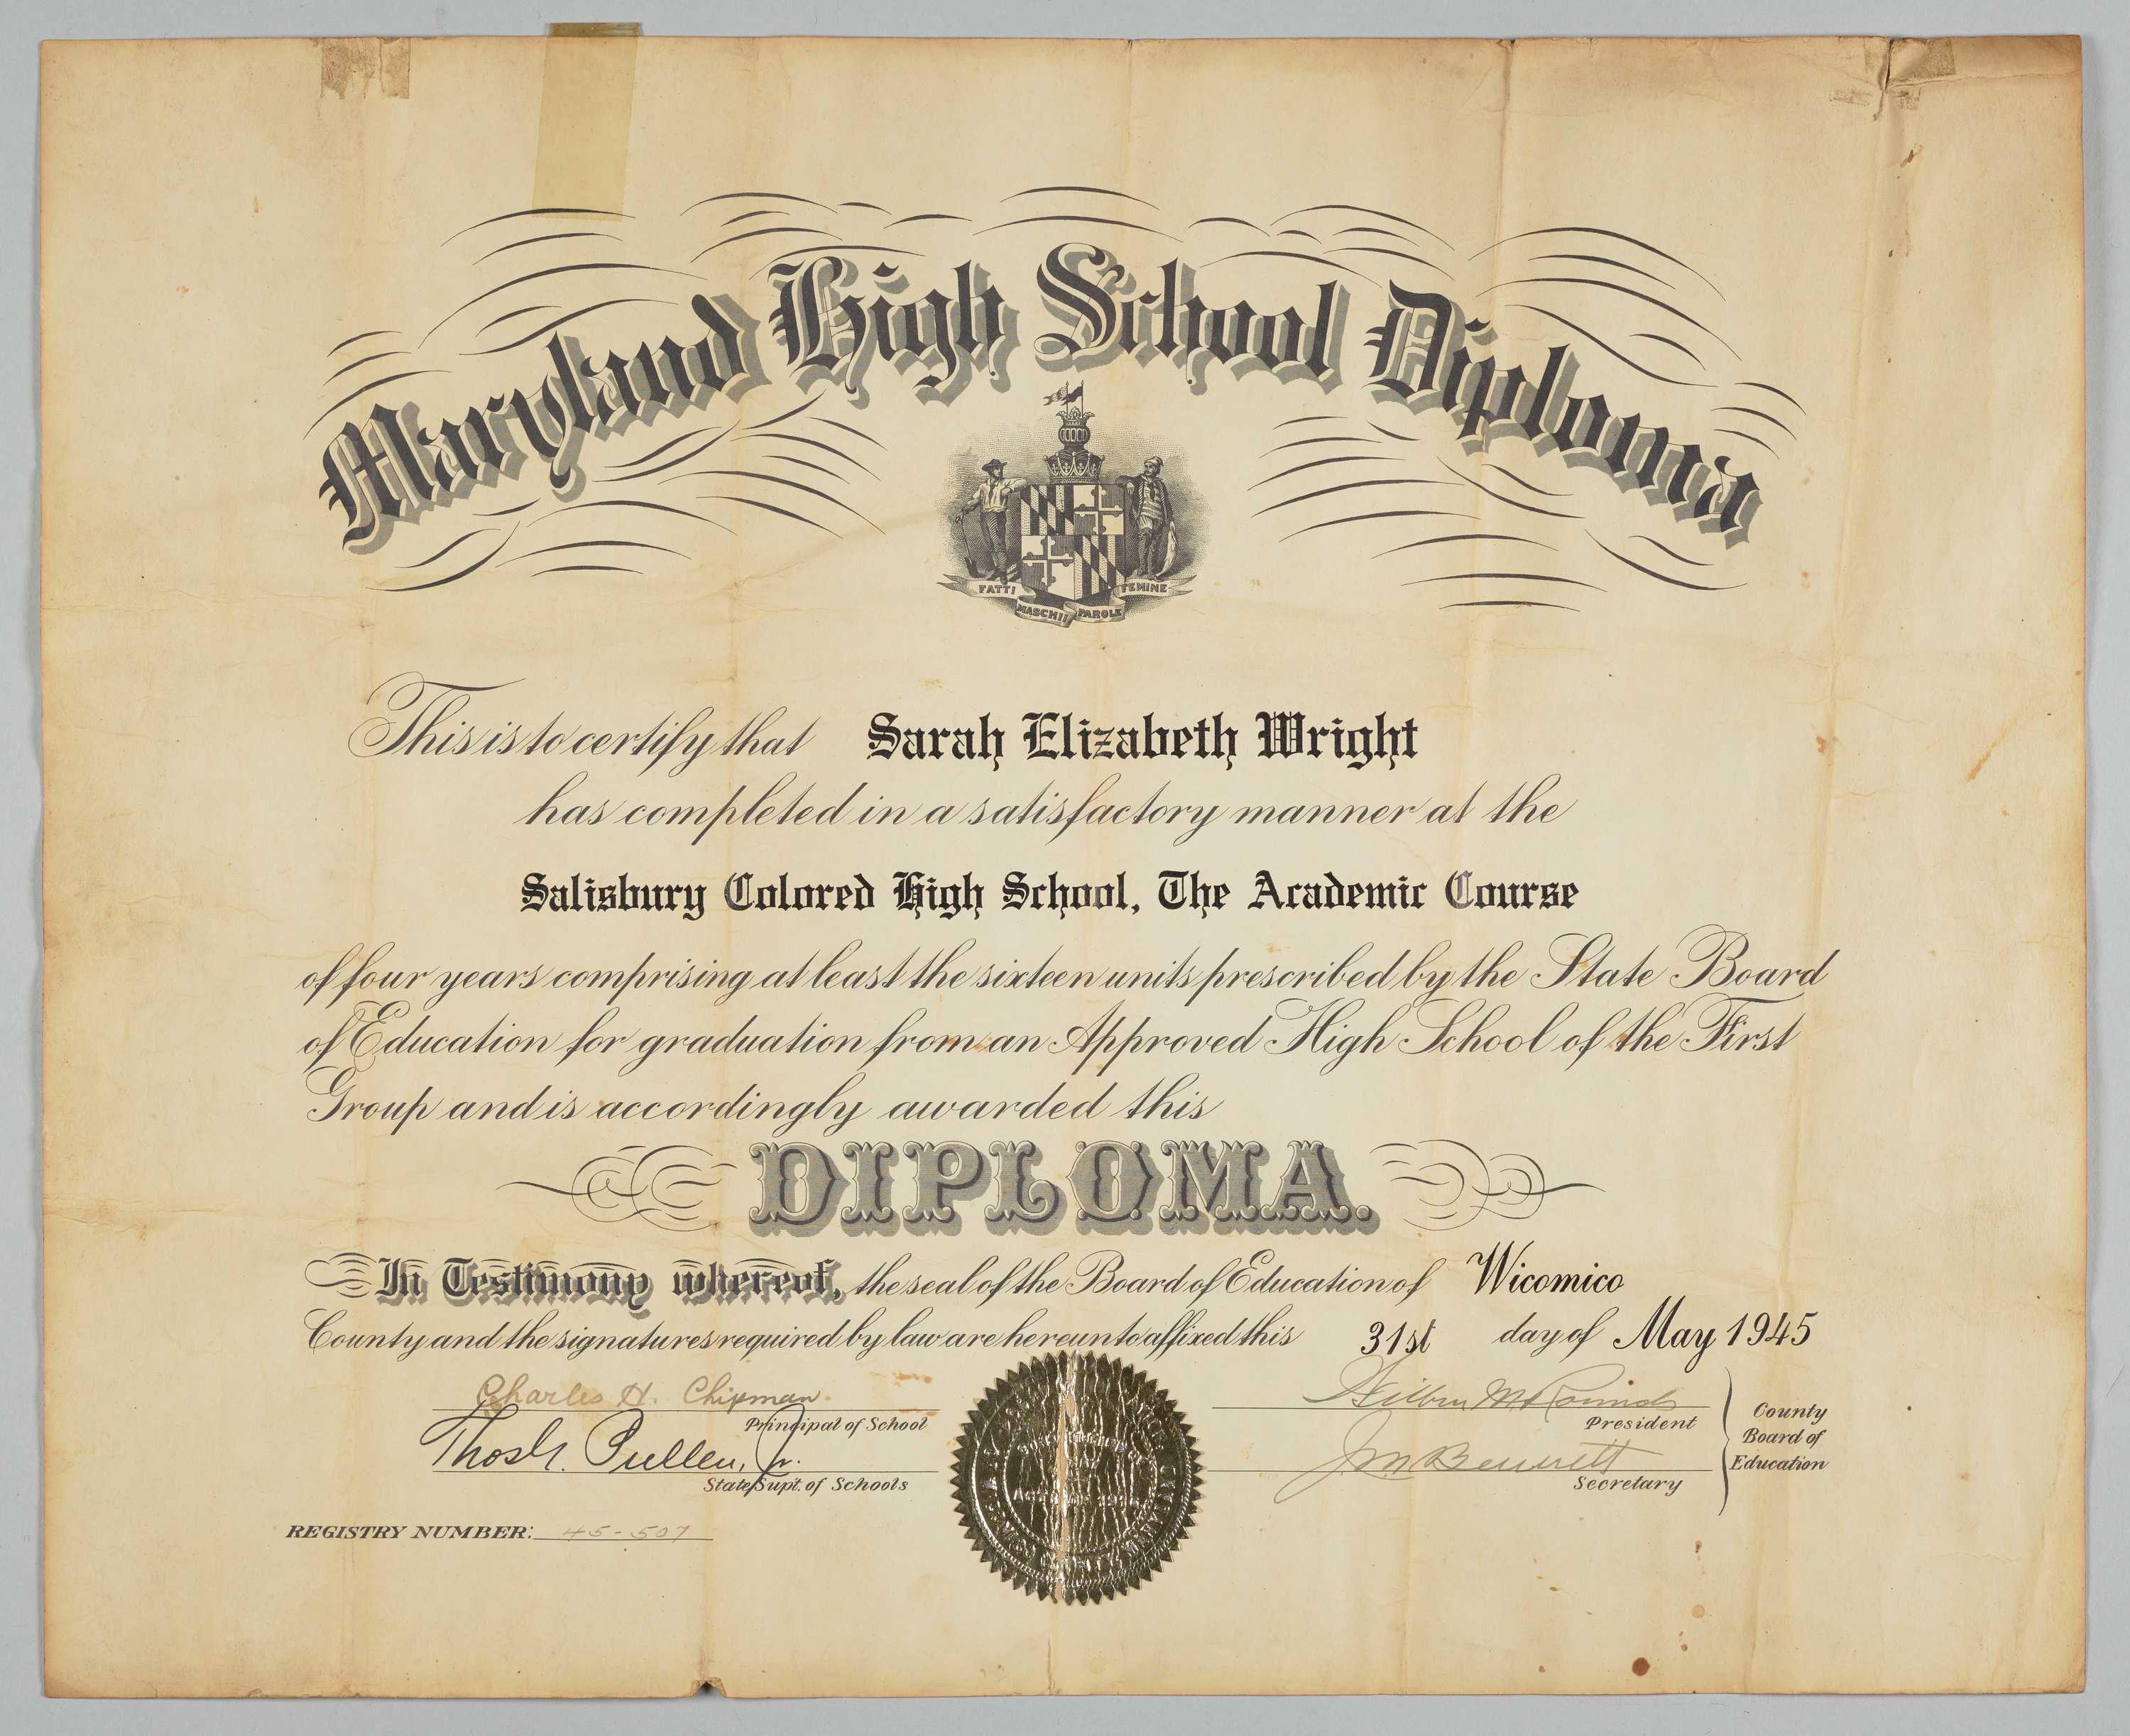 A high school diploma for Sarah E. Wright that says 'Maryland High School Diploma' at the top.